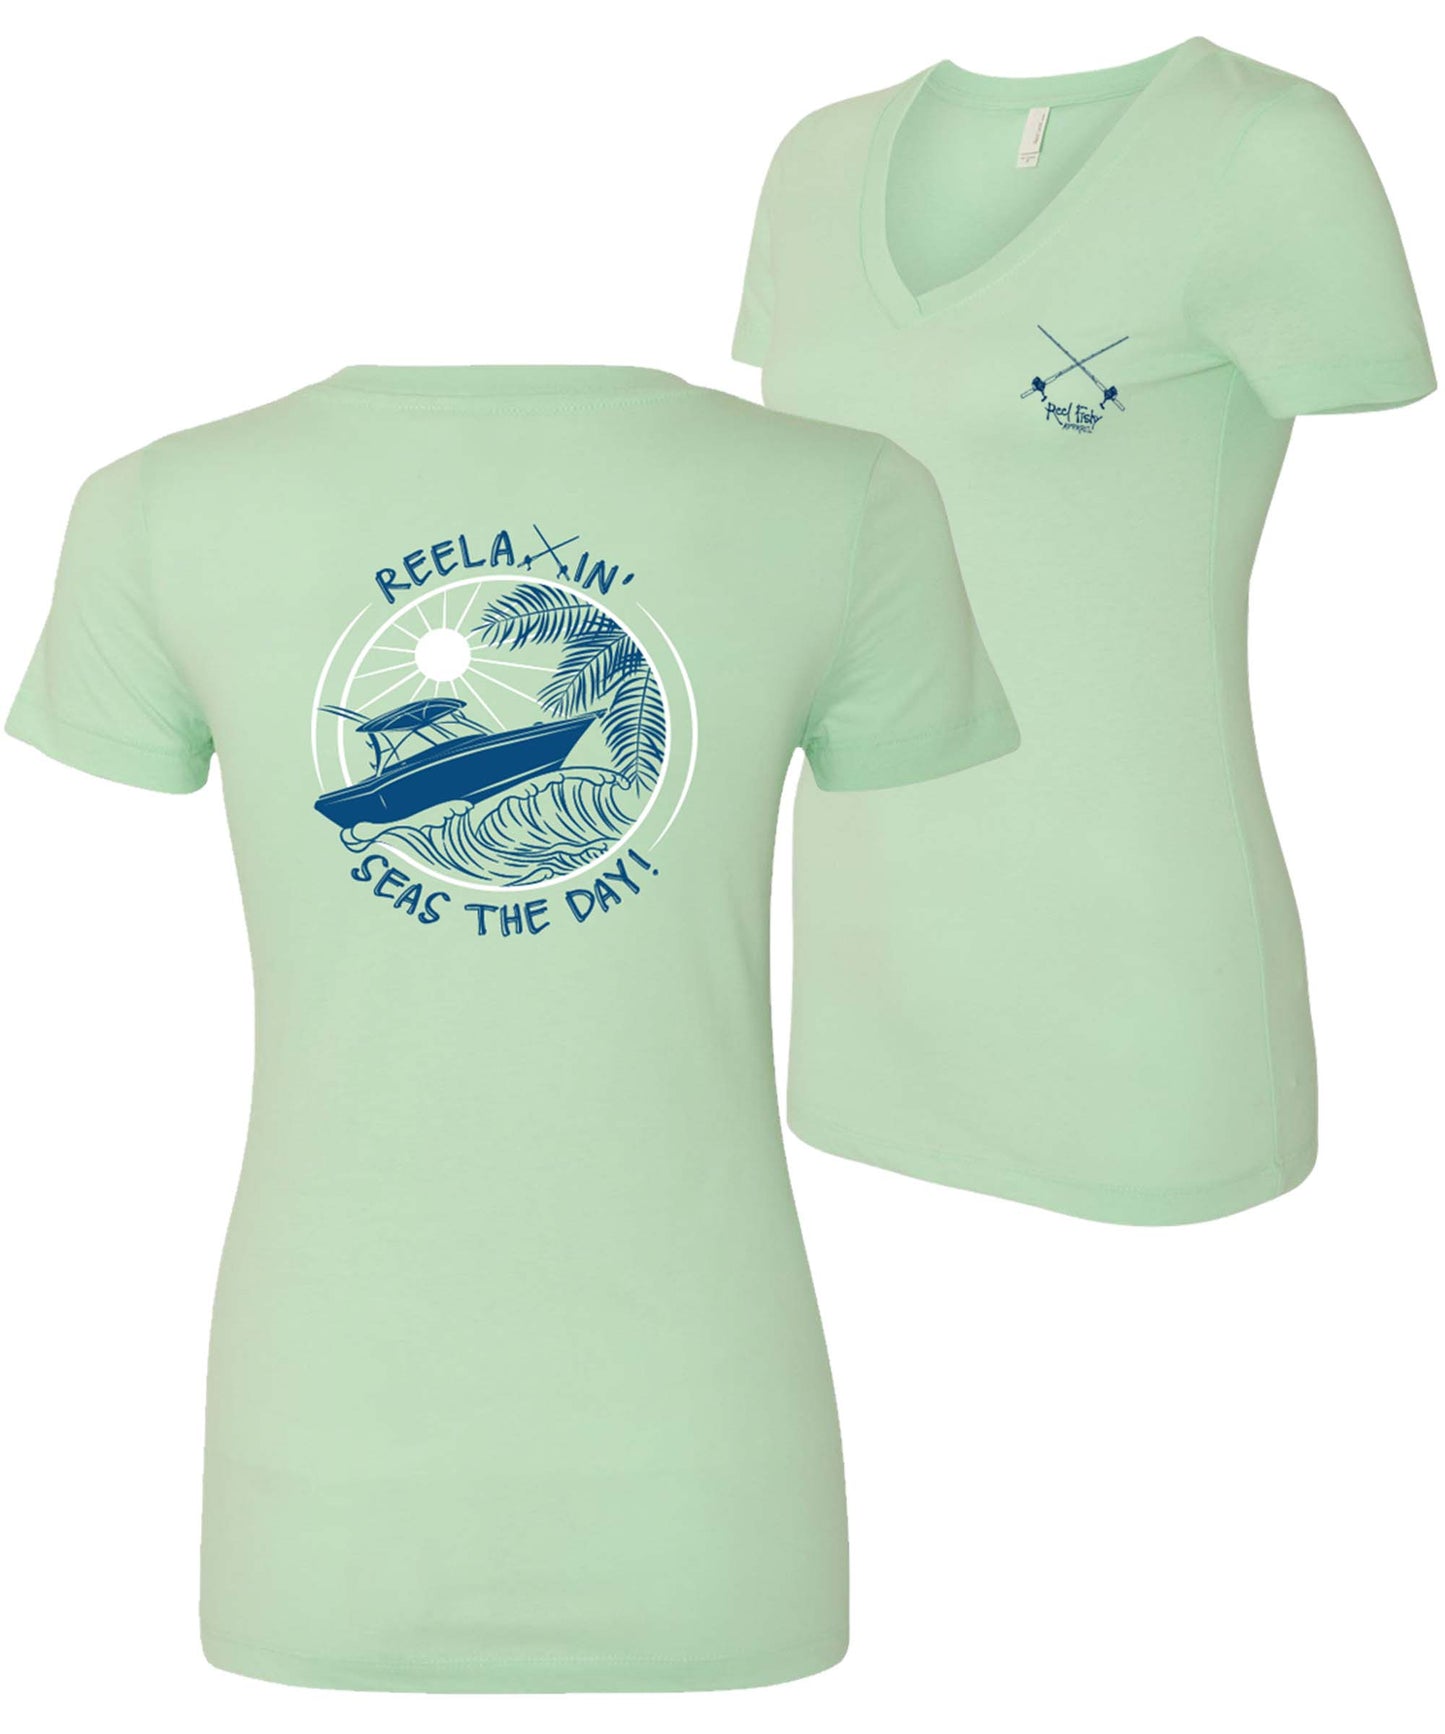 Ladies Reelaxin' - Seas the Day v-neck cotton shirt in Mint